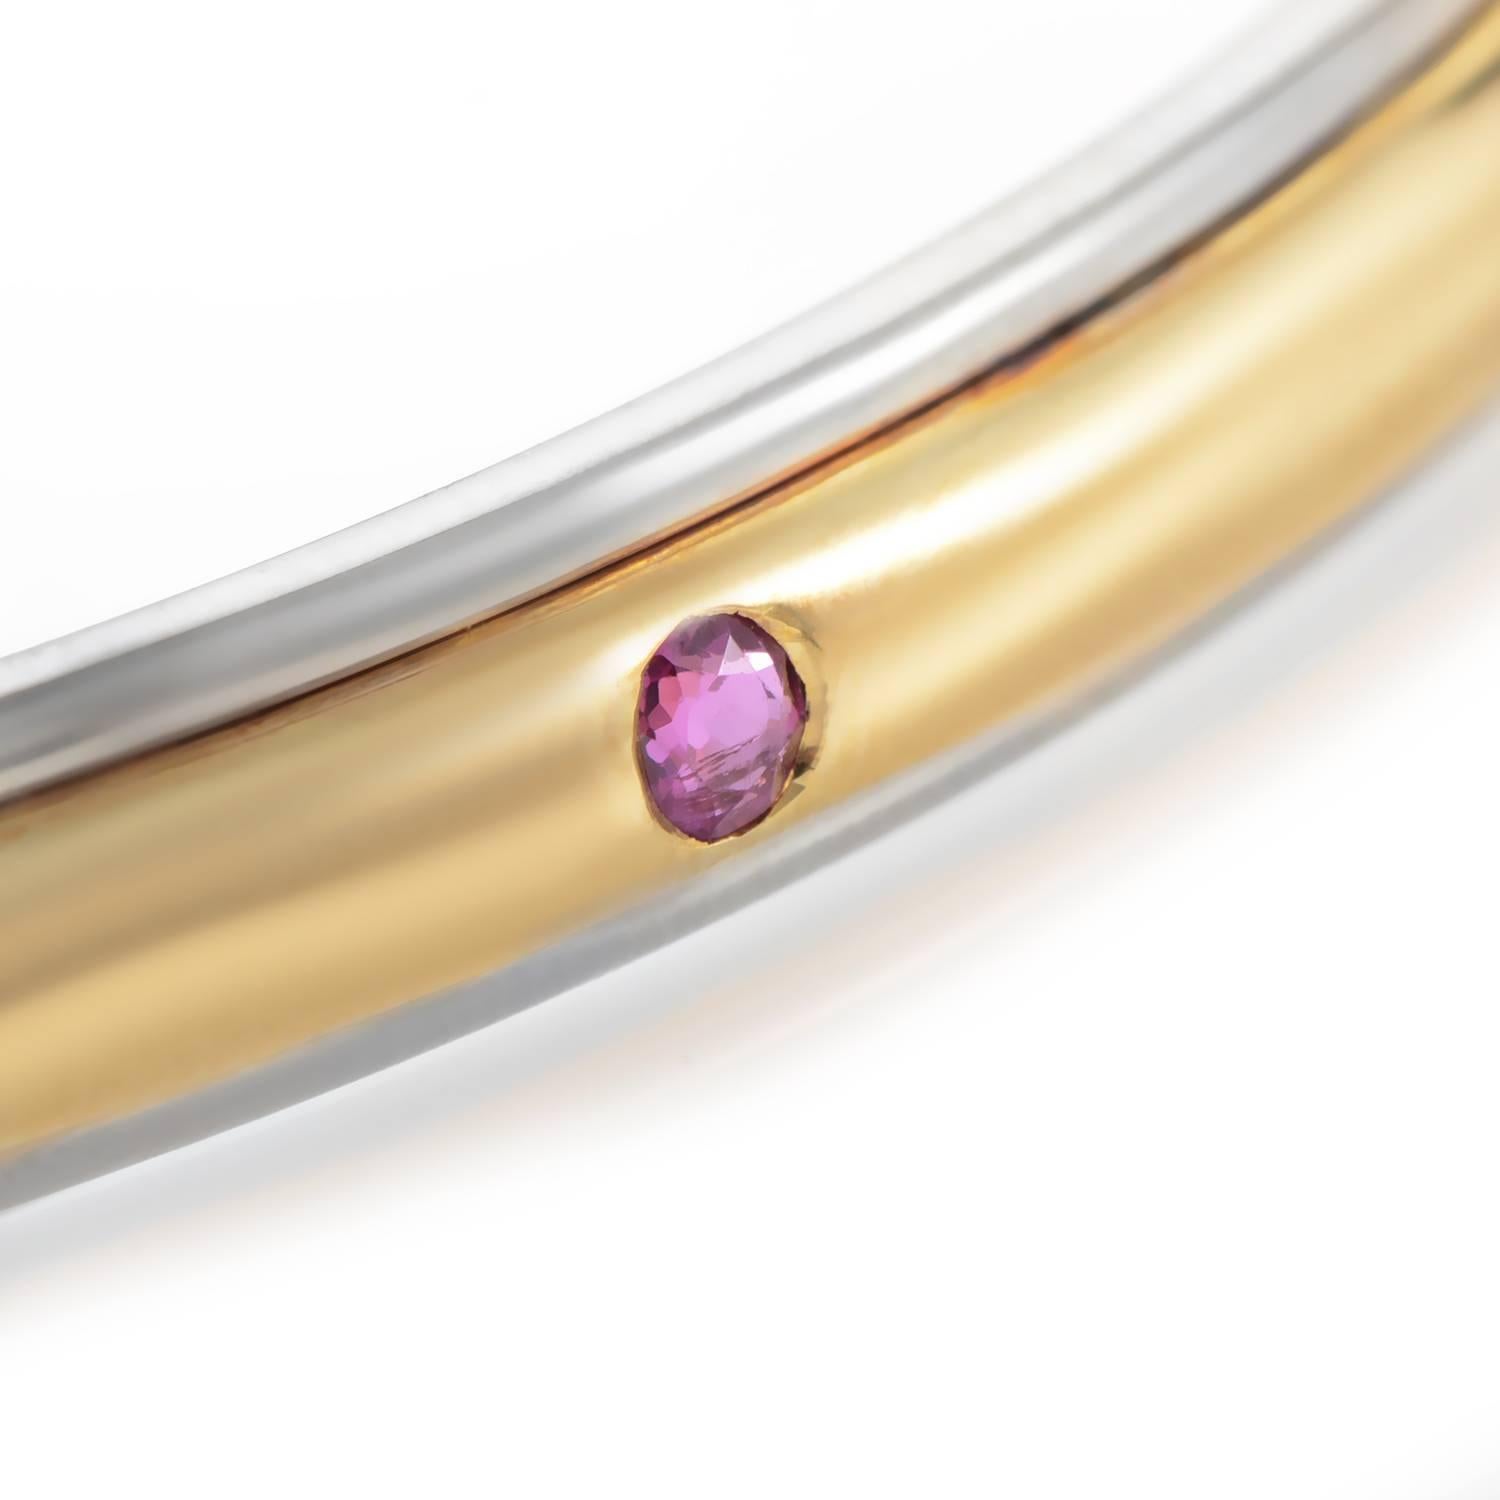 Timeless elegance and sophisticated understated luxury meet in this minimalist bracelet from Yves Saint Laurent, where fabulous 18K yellow and white gold is given a neat and slim shape, embellished with rubies, sapphires and emeralds for exceptional